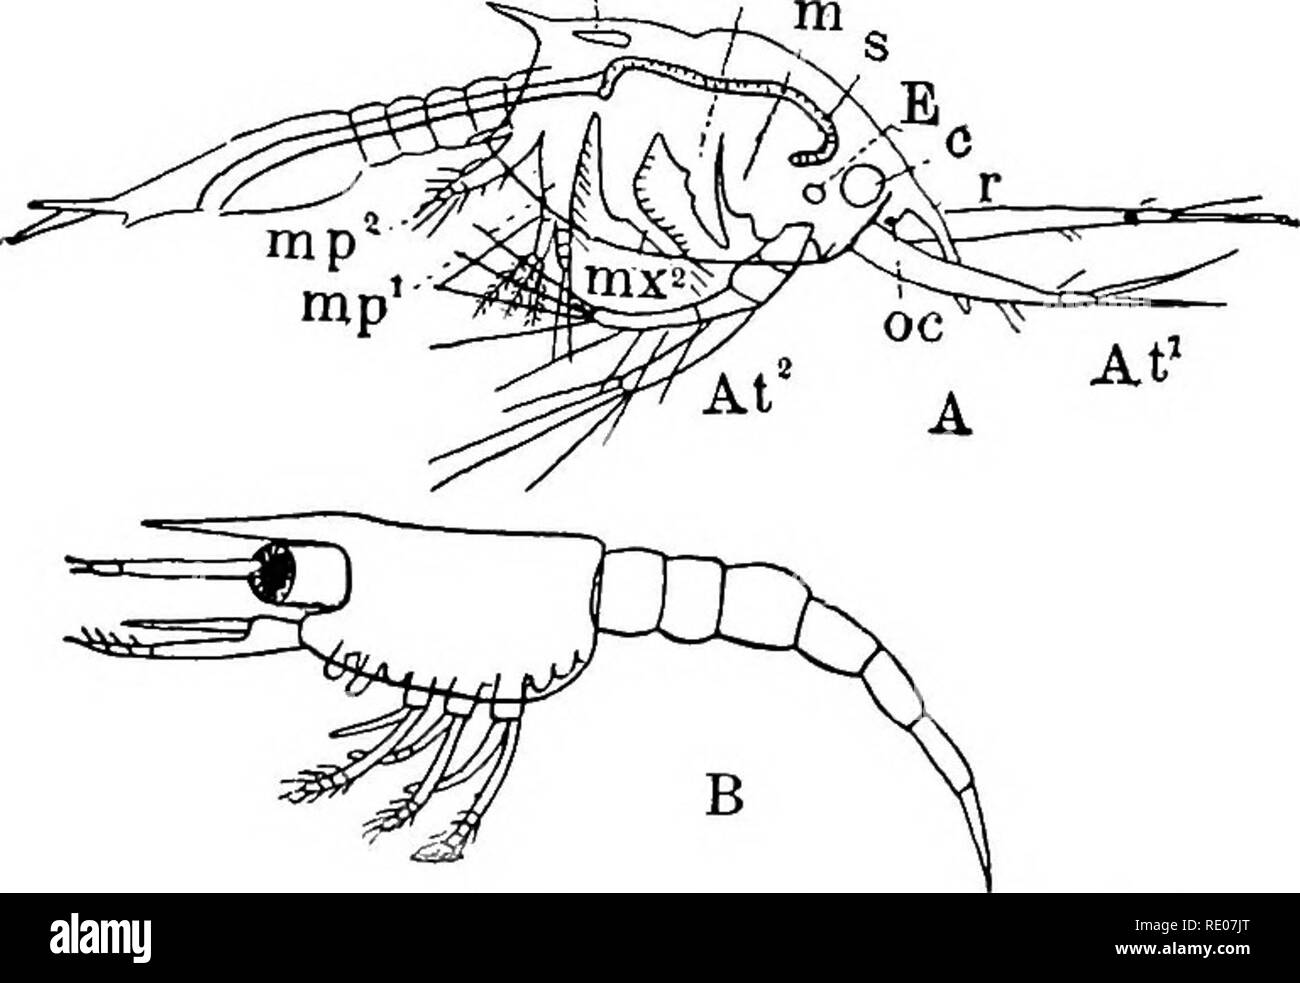 . A text-book of invertebrate morphology. Invertebrates. TyPE VBV8TACEA. 419 all the members of the class, and it is only in the Cirrhipedia that a second definite larval form can be distinguished, the Cypris-larva, to which attention has already been called (p. 399). In the Malacostraca the occurrence of a free-swimmiug Nauplius is the exception rather than the rule, and indeed larval forms are practically wanting in some groups, such as the Leptostraca and Arthrostraca, and in certain species or families of other groups (e.g. Mysida, Cambarus). In the genus Penceus among the Decapods, and in Stock Photo